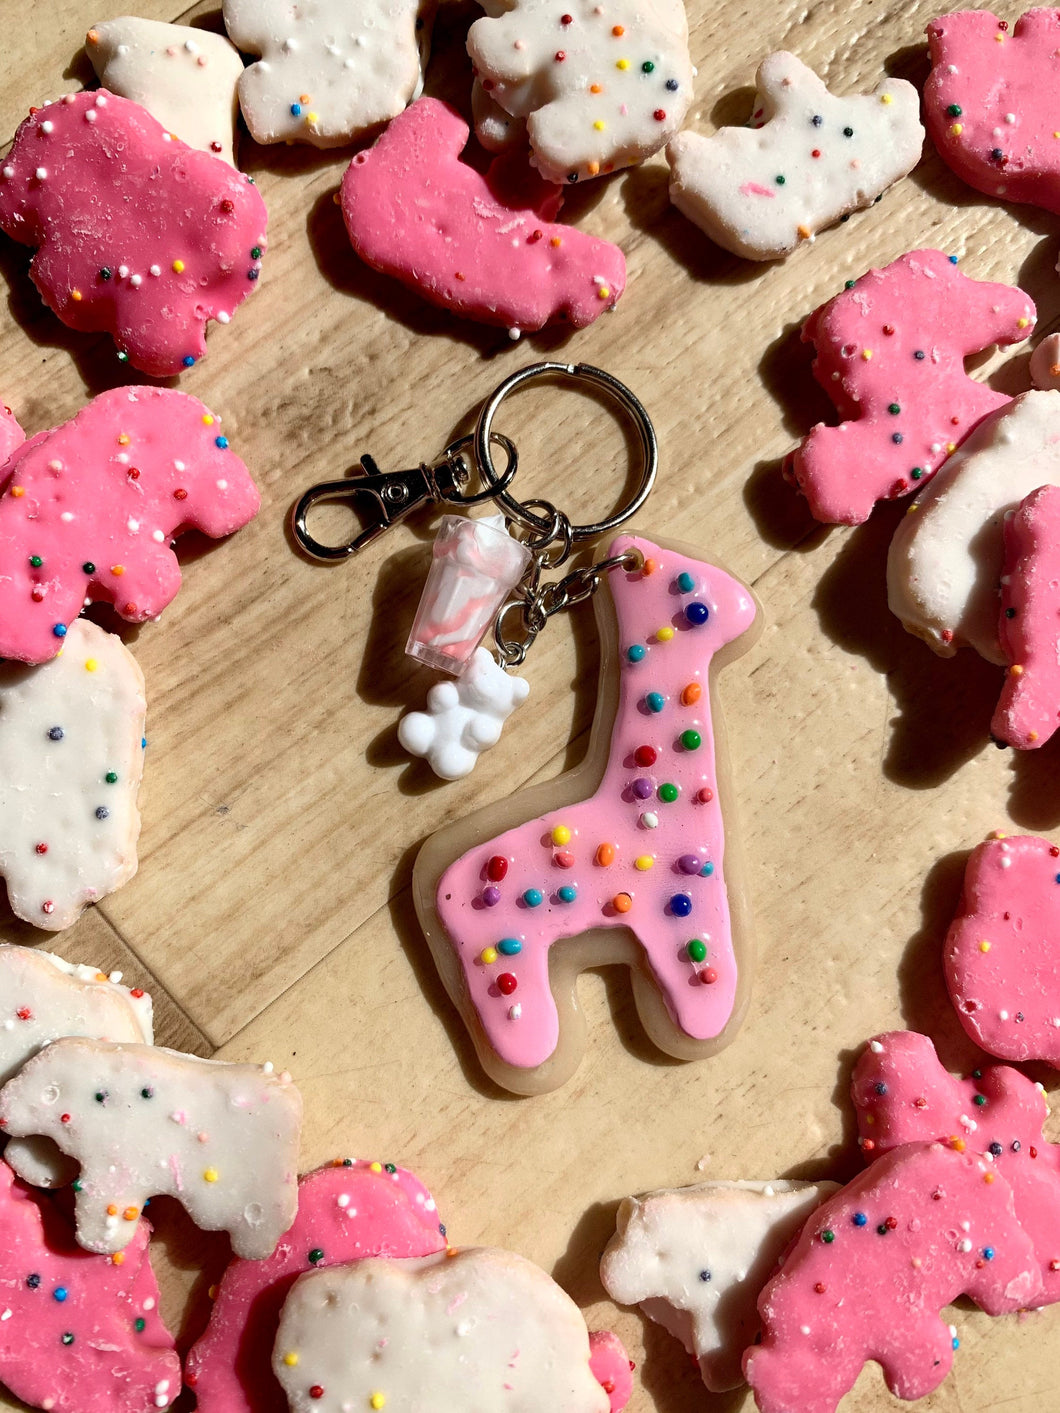 Frosted Animal Cookie Inspired KeyChain